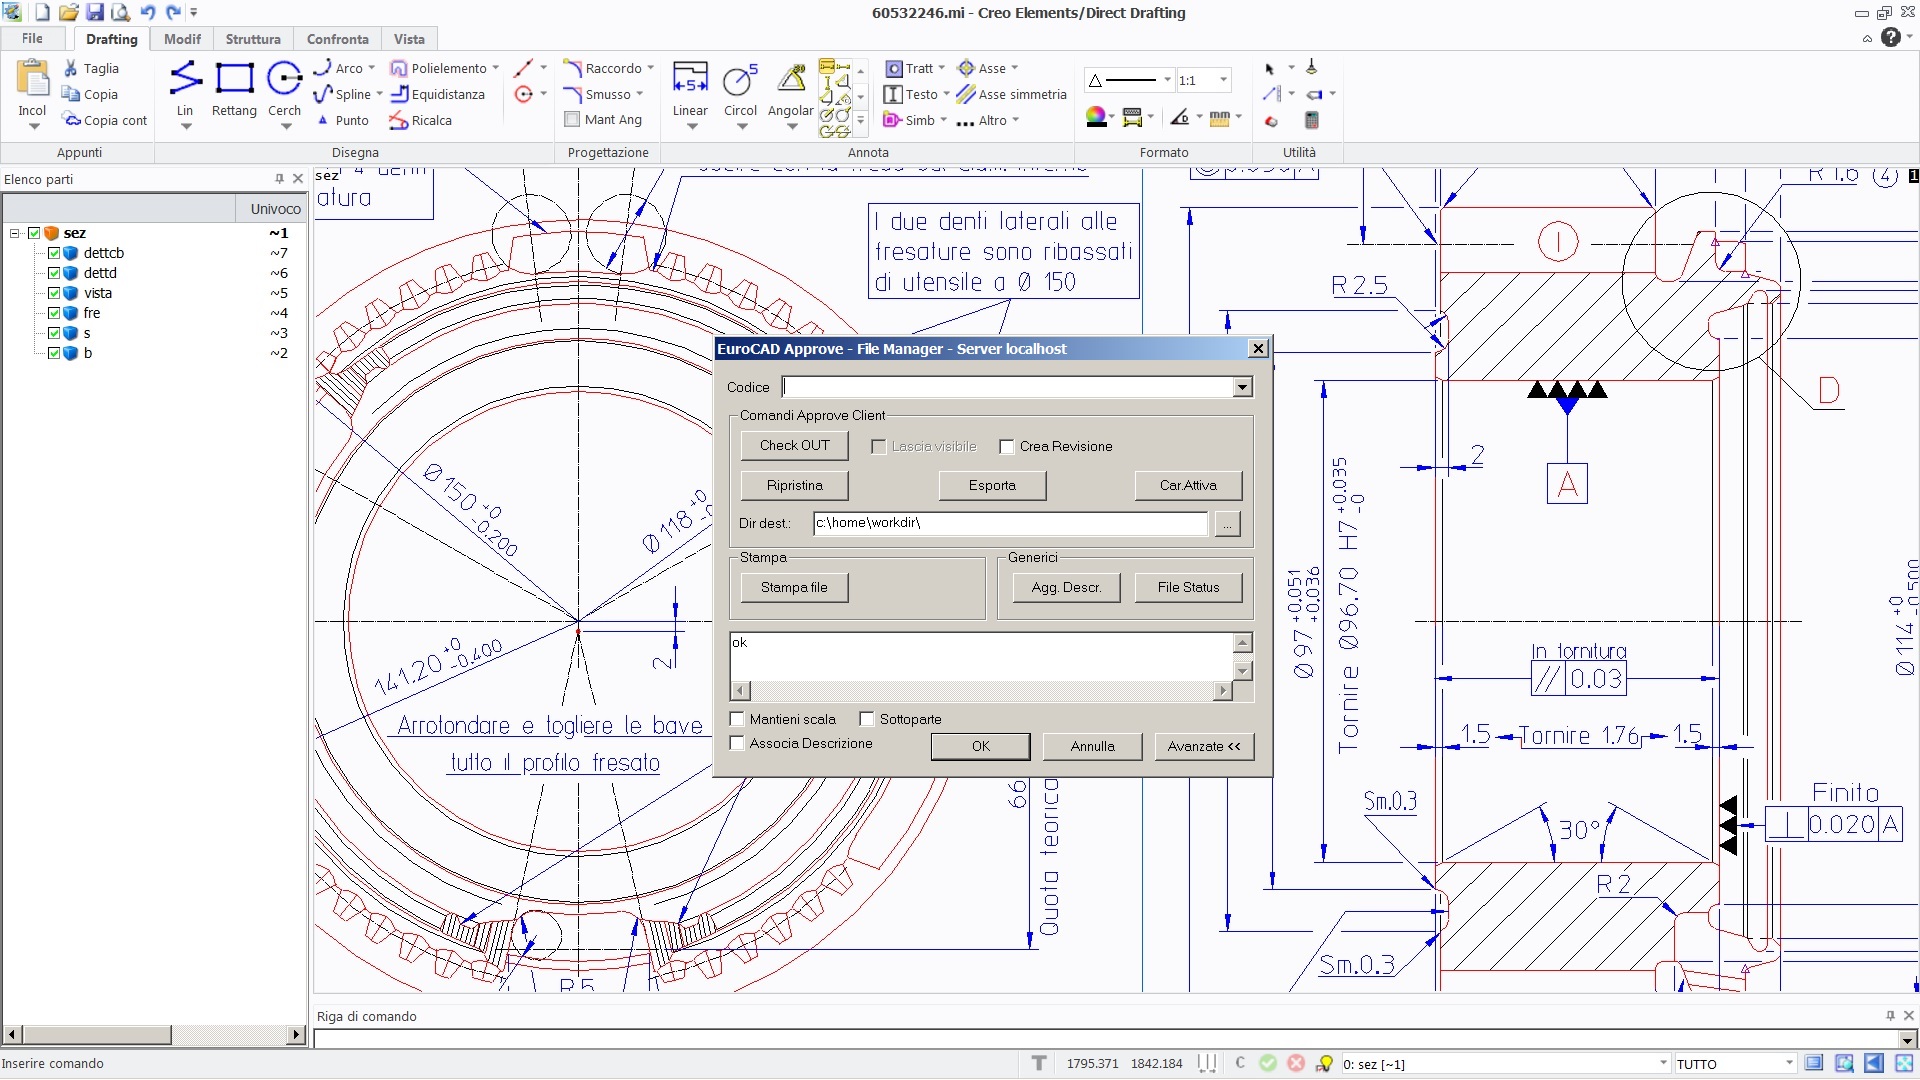 Approve client PTC Creo Elements/Direct Drafting (ME10)